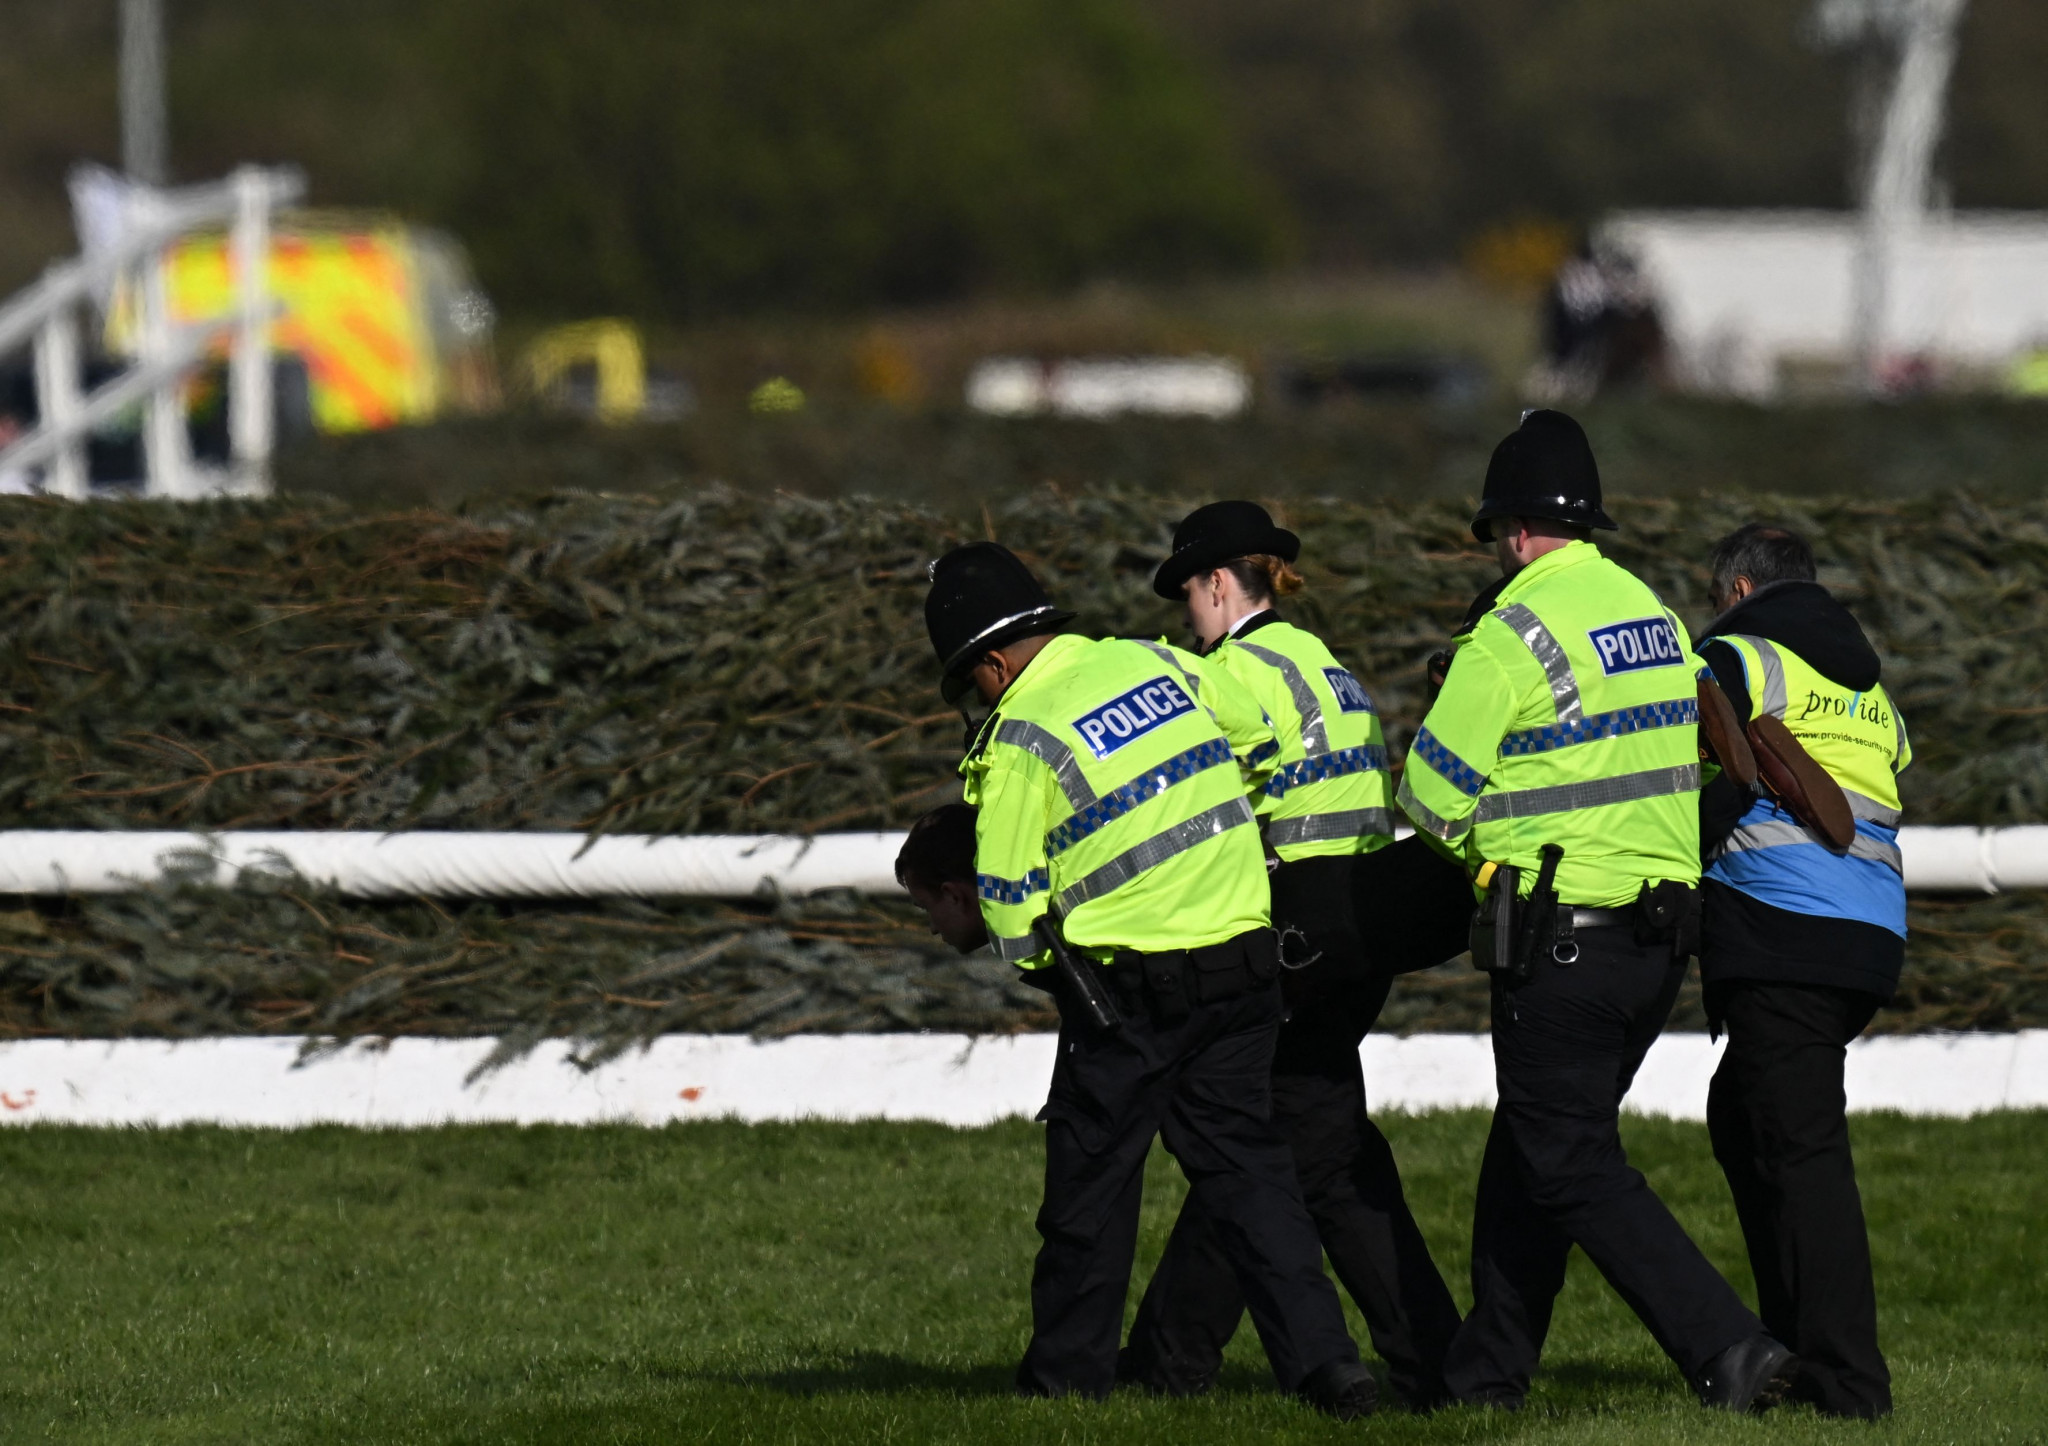 The start of the Grand National was delayed by 15 minutes after protesters invaded Aintree Racecourse ©Getty Images